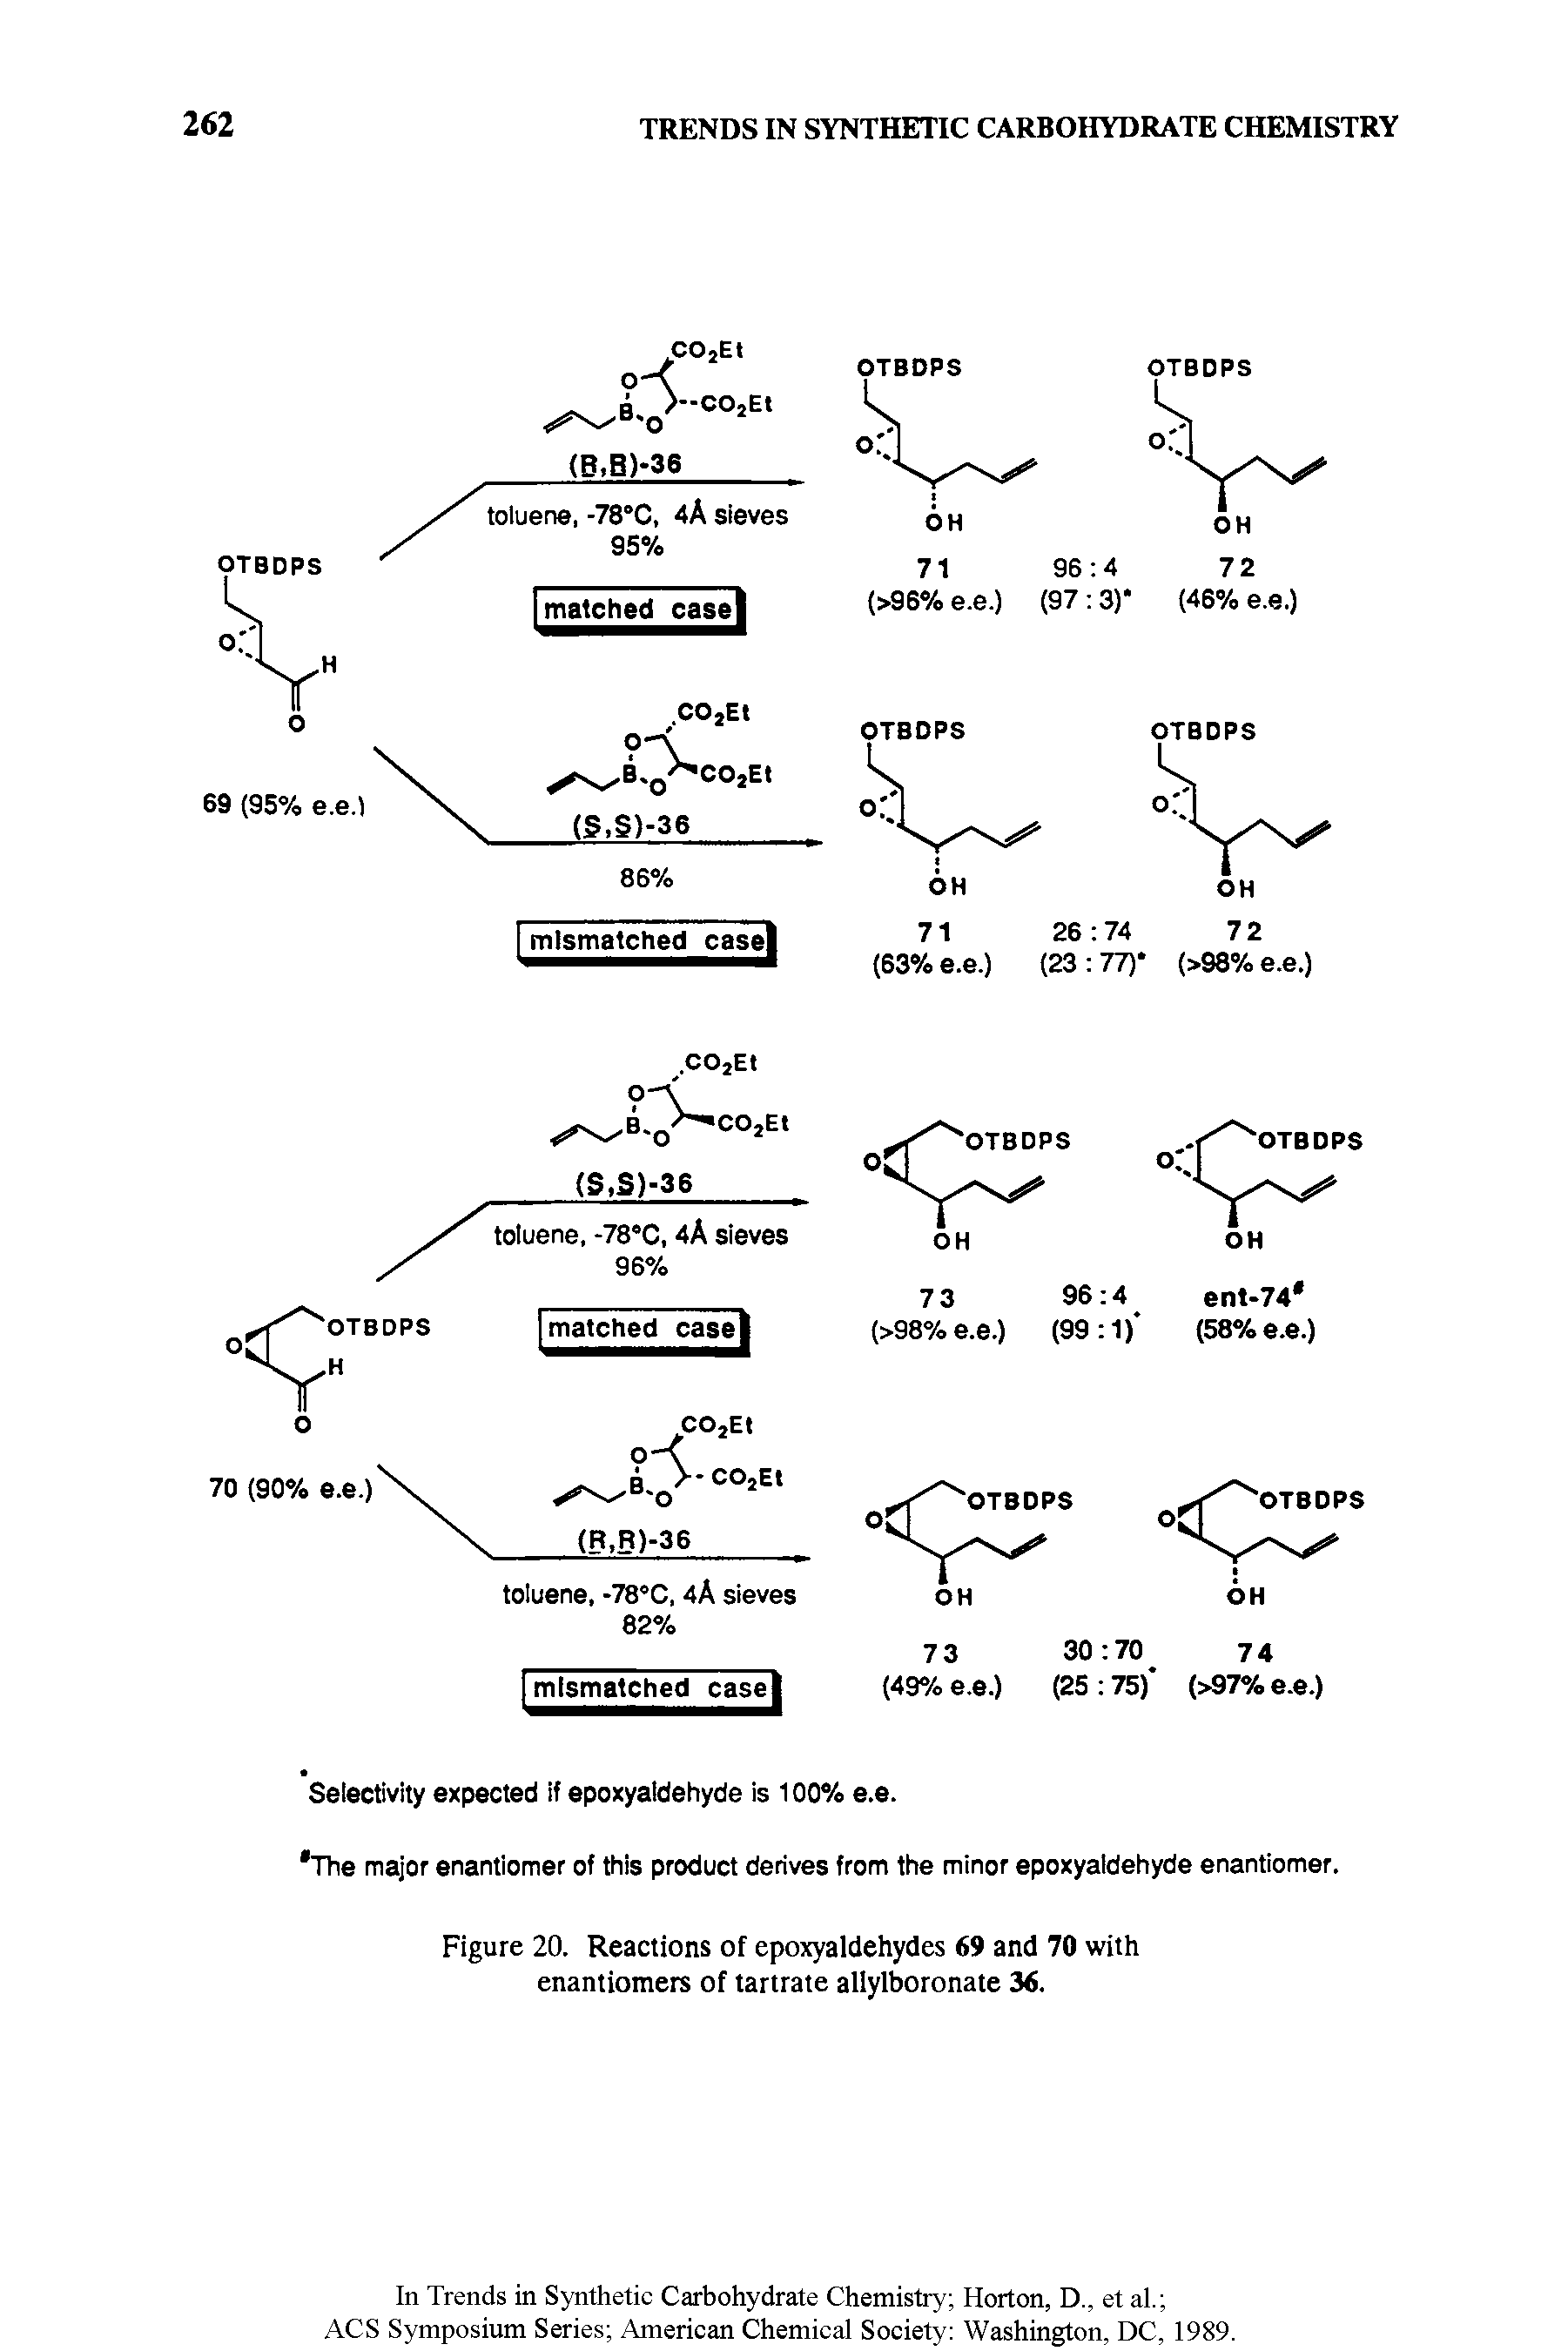 Figure 20. Reactions of epoxyaldehydes 69 and 70 with enantiomers of tartrate allylboronate 36.